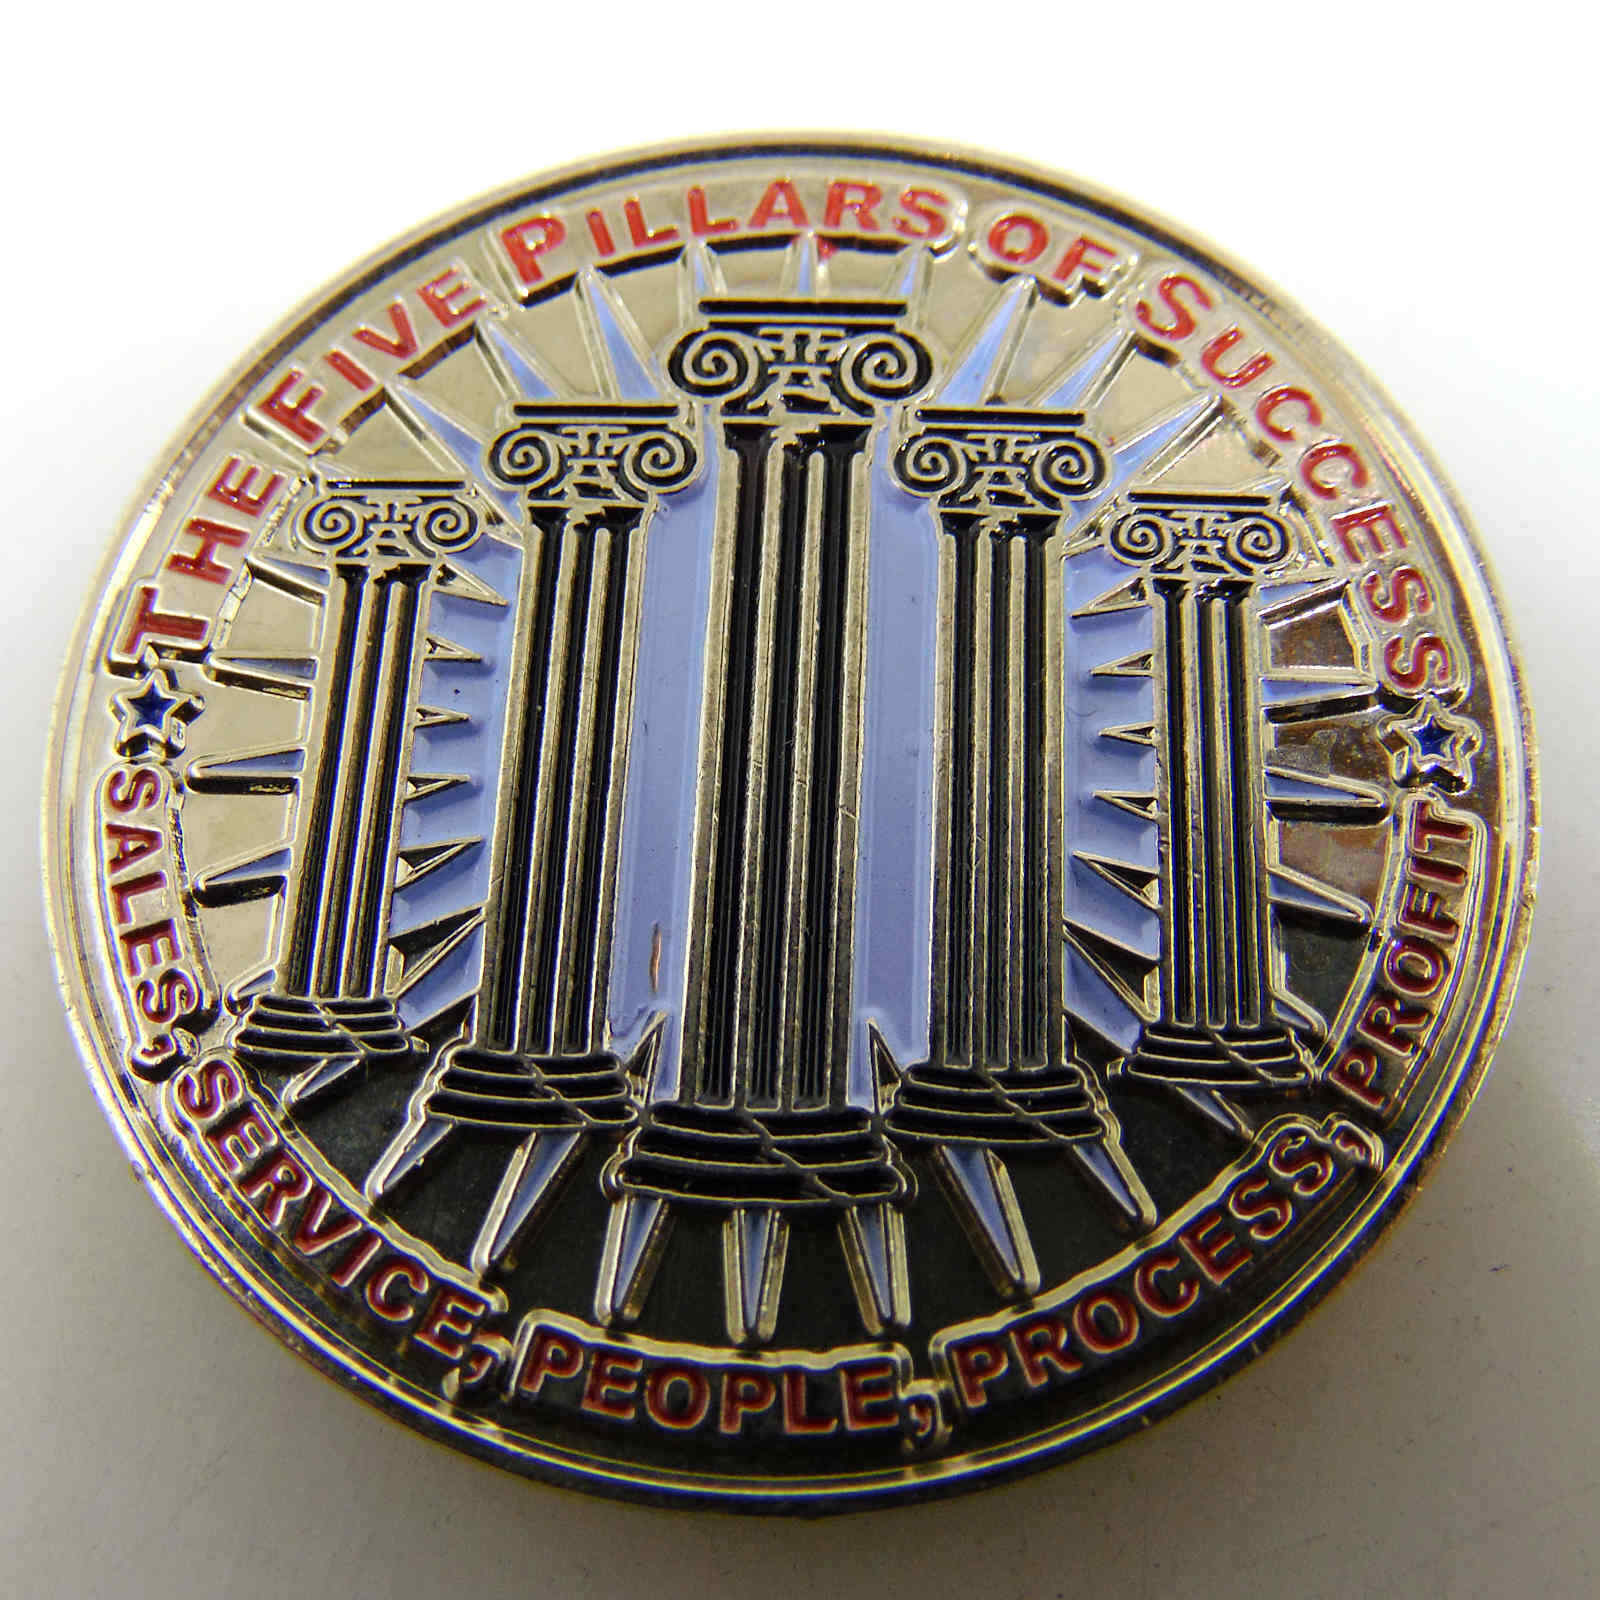 NORTH CENTRAL REGION SUPERIOR PERFORMANCE SEARS #128 CHALLENGE COIN